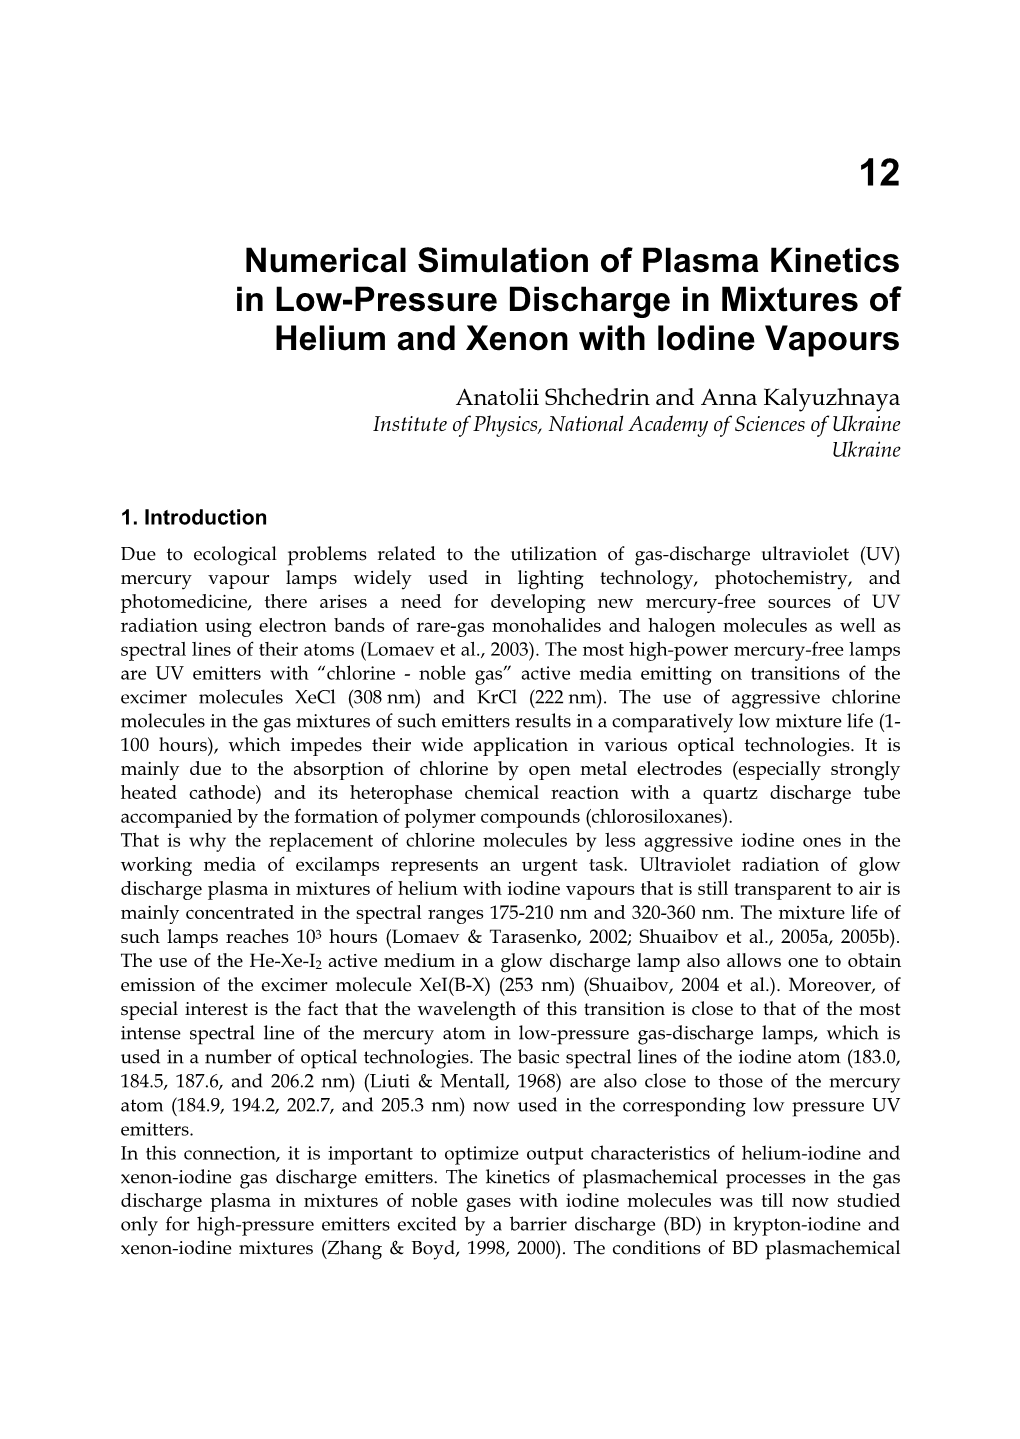 Numerical Simulation of Plasma Kinetics in Low-Pressure Discharge in Mixtures of Helium and Xenon with Iodine Vapours